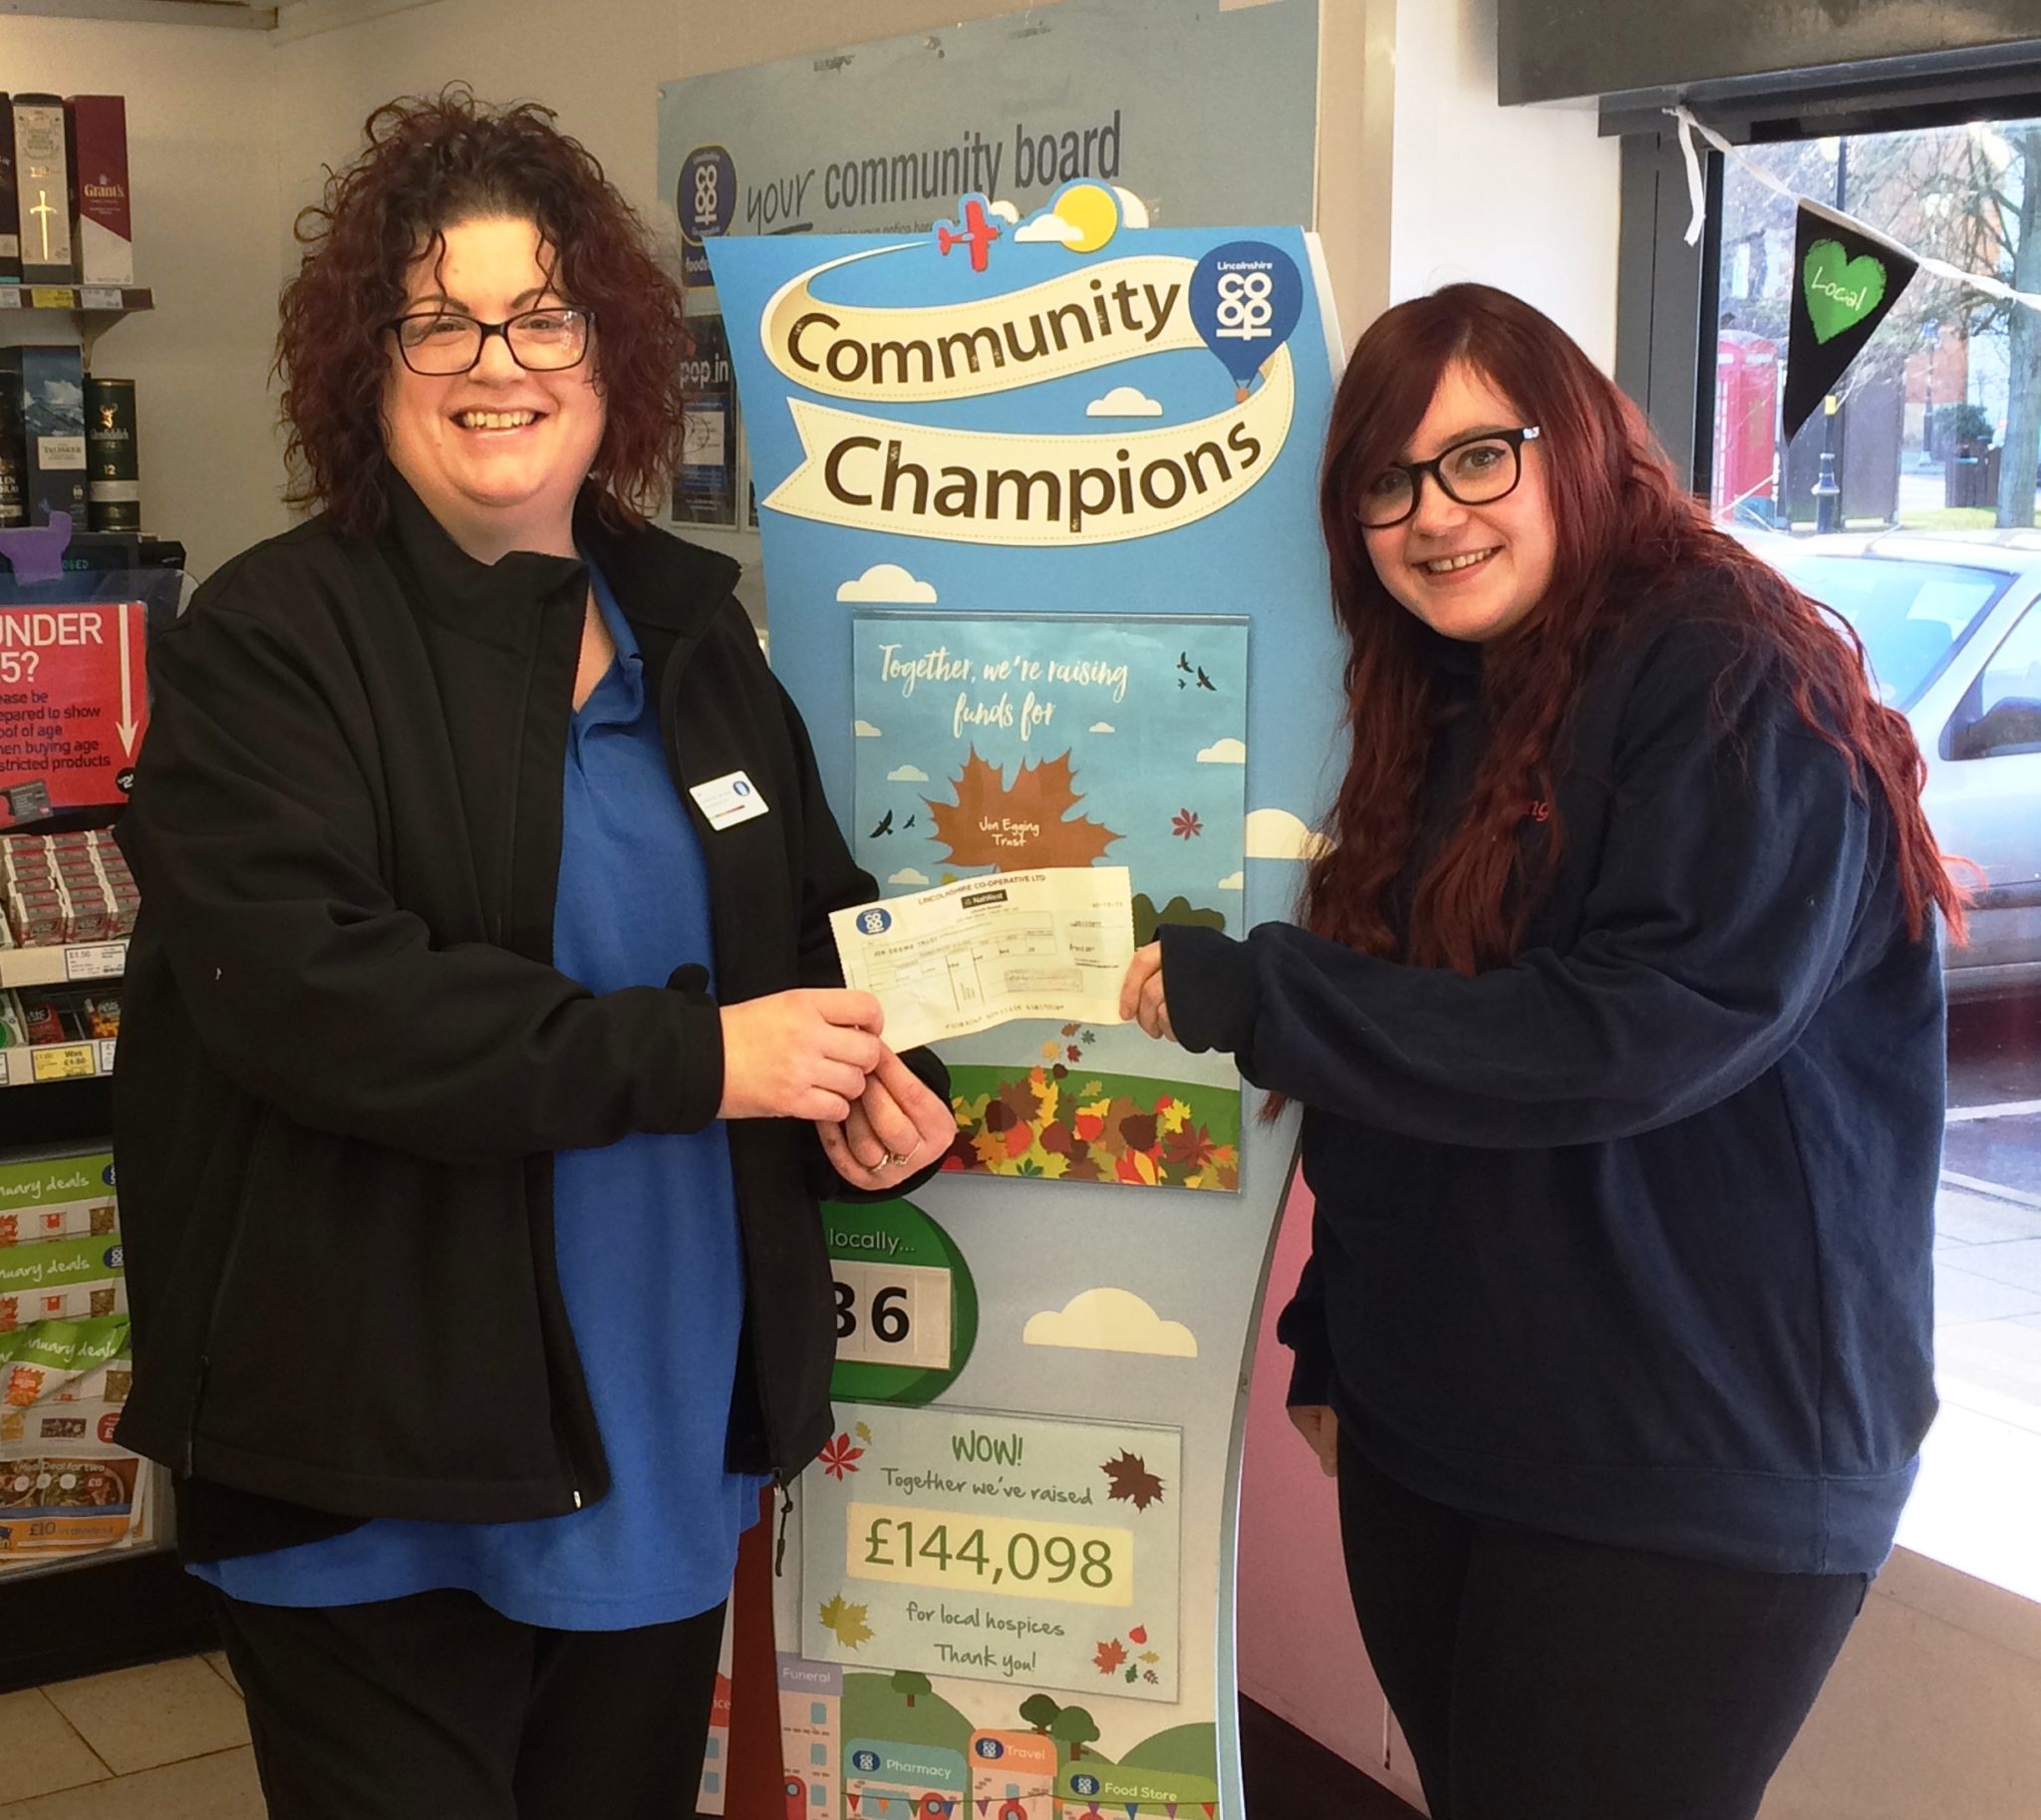 Financial boost for JET thanks to the Lincolnshire Co-op Community Champions Scheme